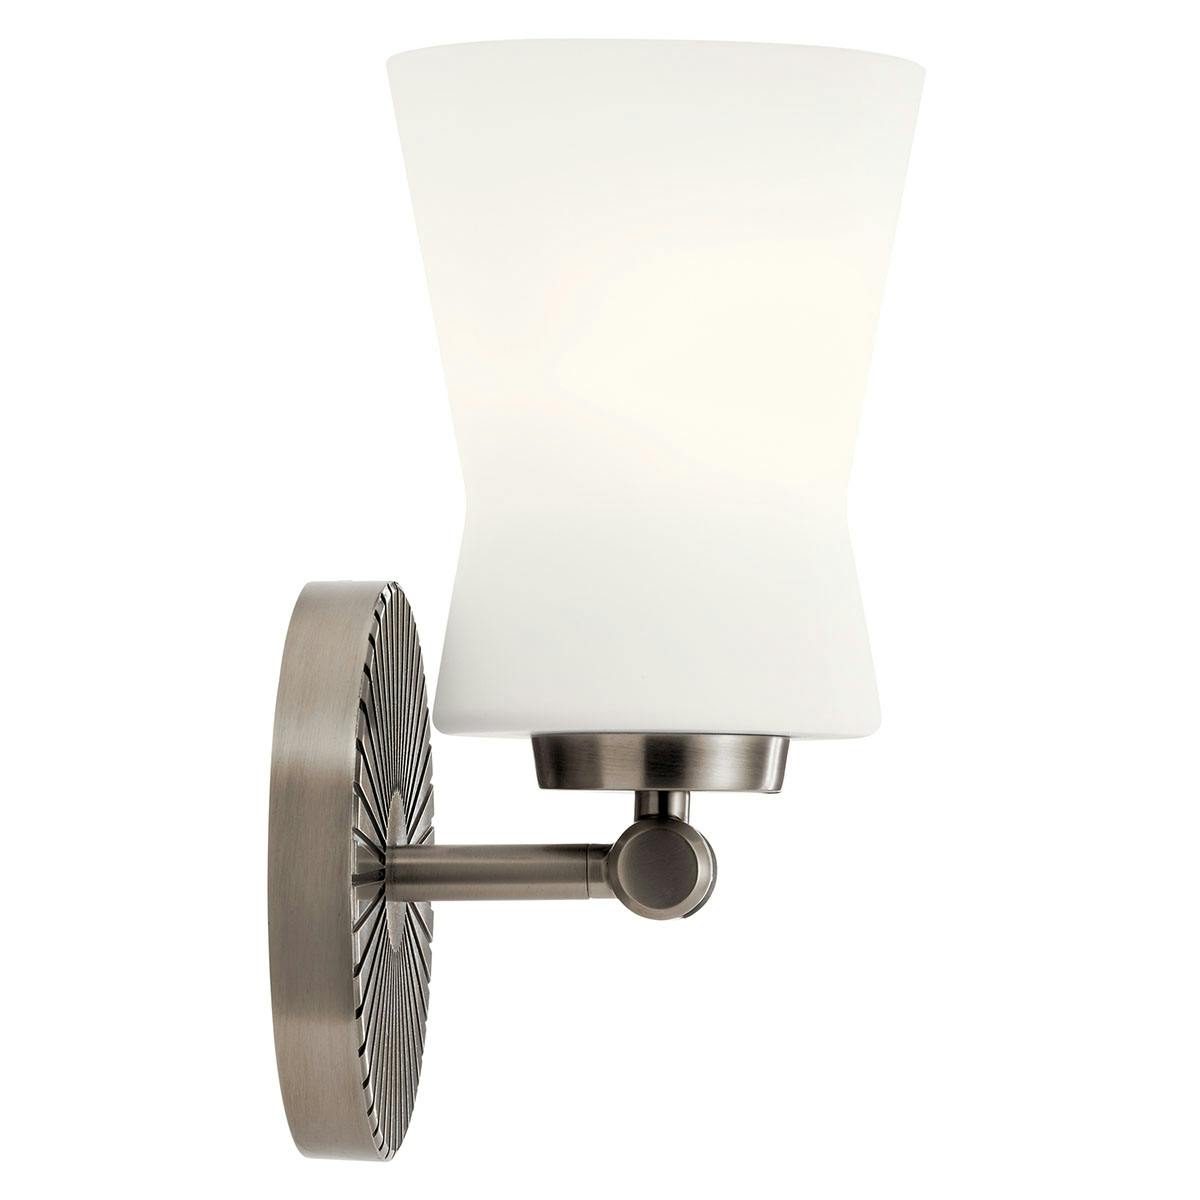 Profile view of the Brianne 1 Light Sconce Classic Pewter on a white background